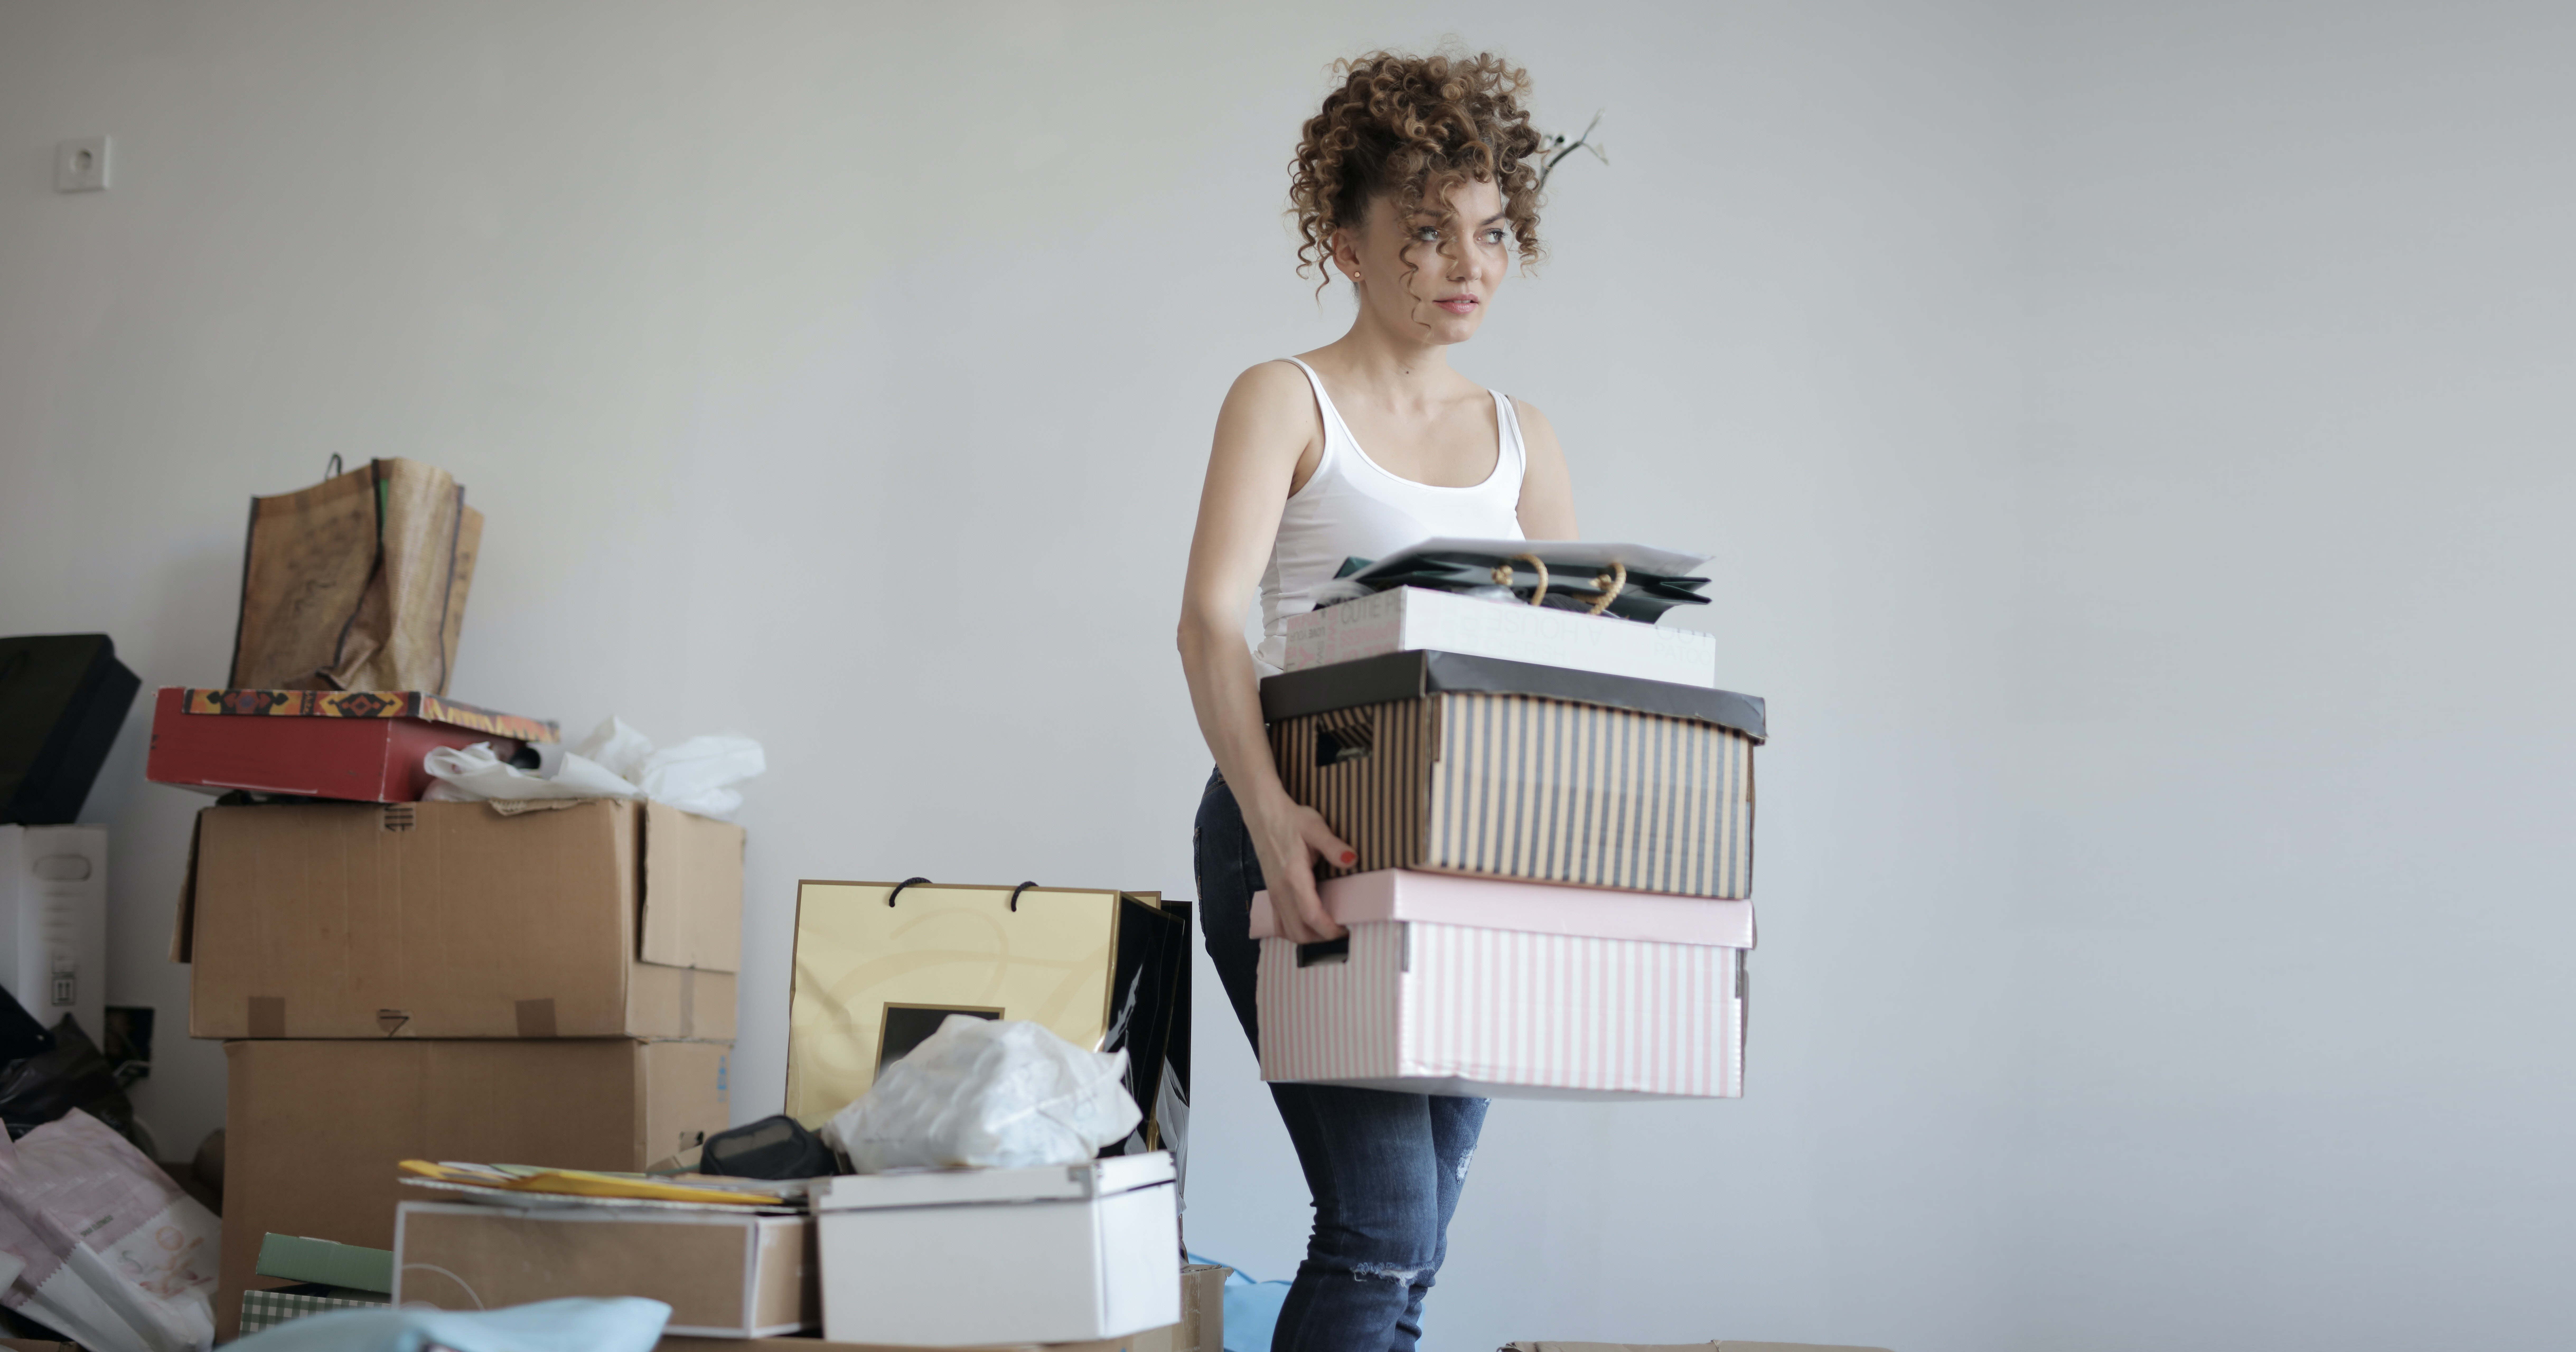 a woman carrying boxes in a chaotic messy room